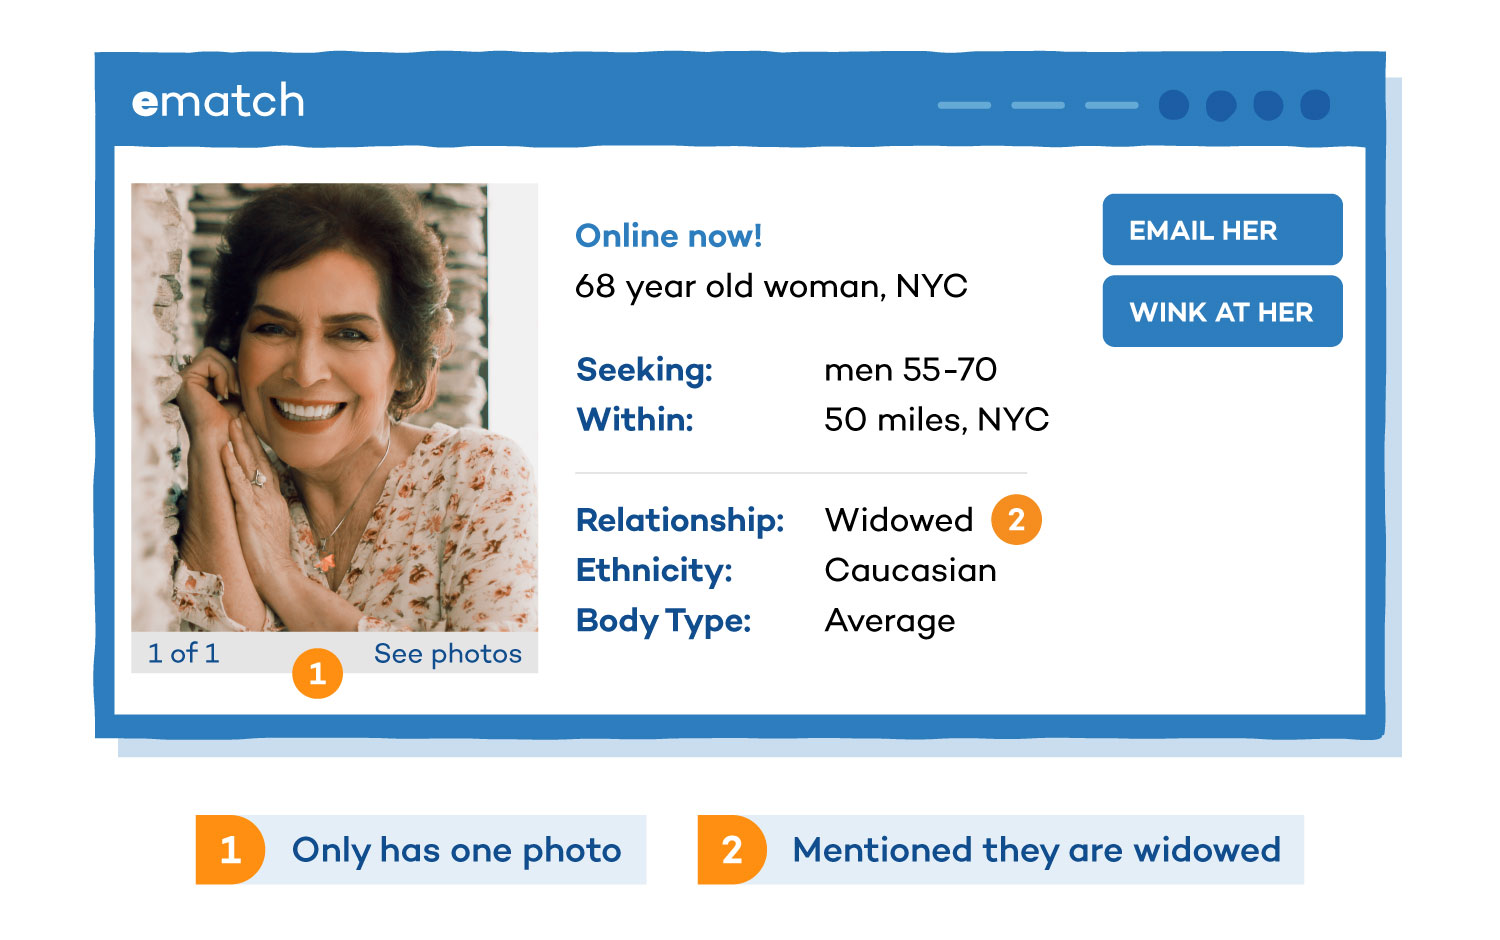 Visual that shows an online dating scam